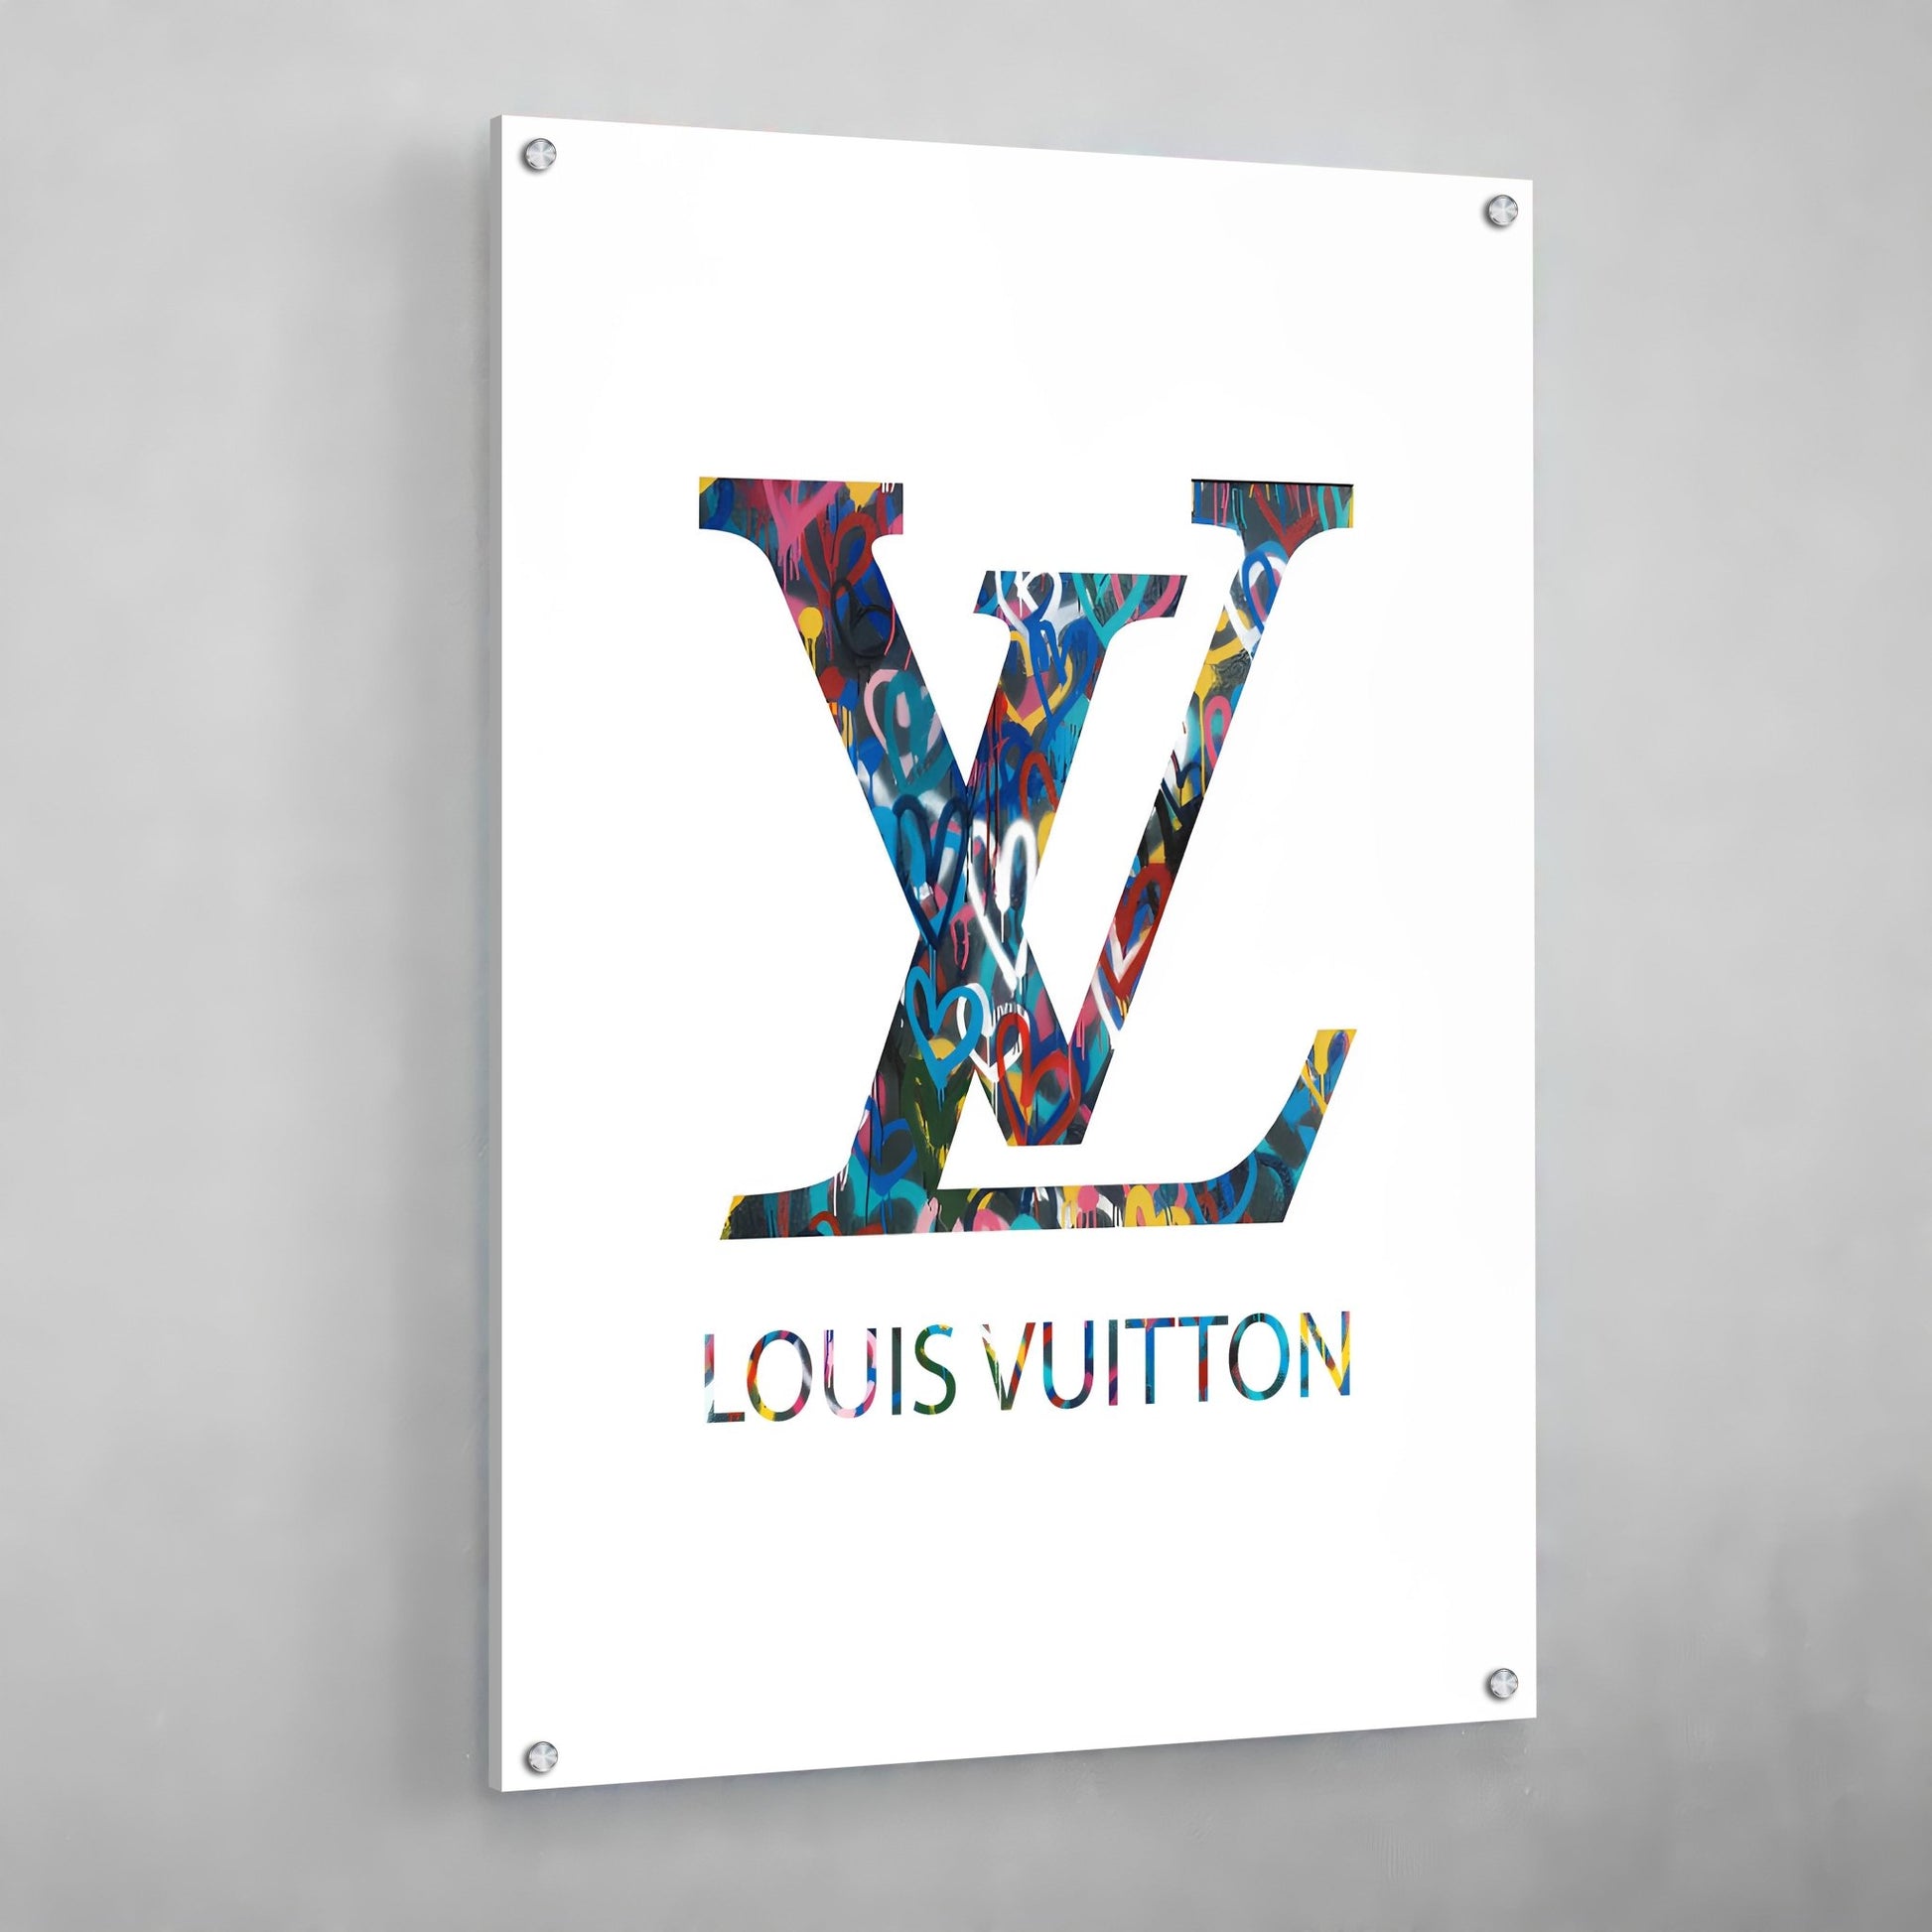 Louis Vuitton Logo Pattern V4 Wall Decal Home Decor Bedroom Room